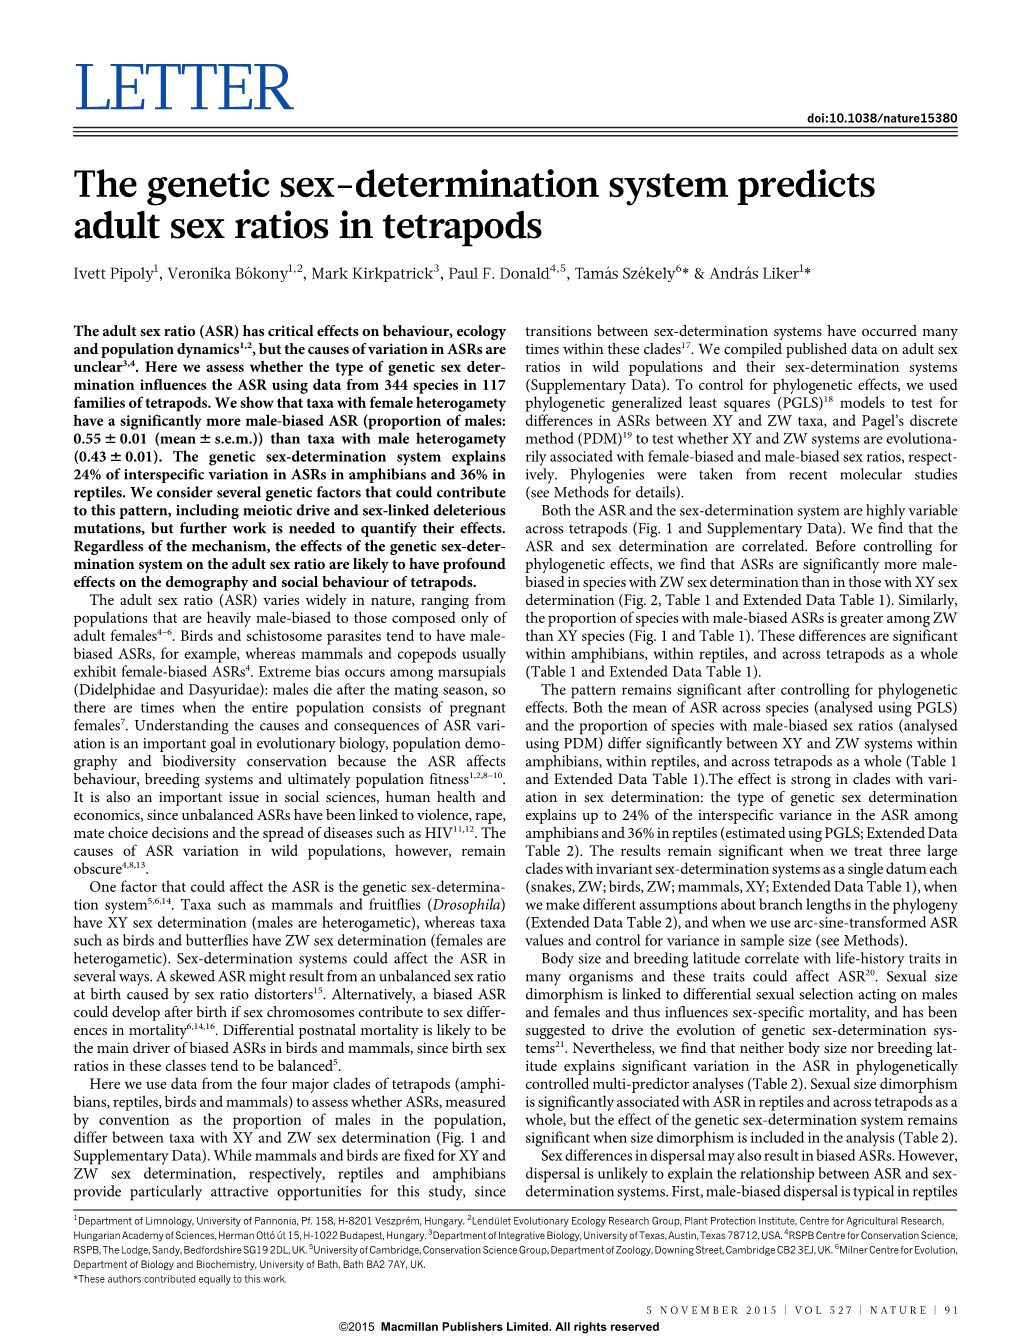 (2015) the Genetic Sex-Determination System Predicts